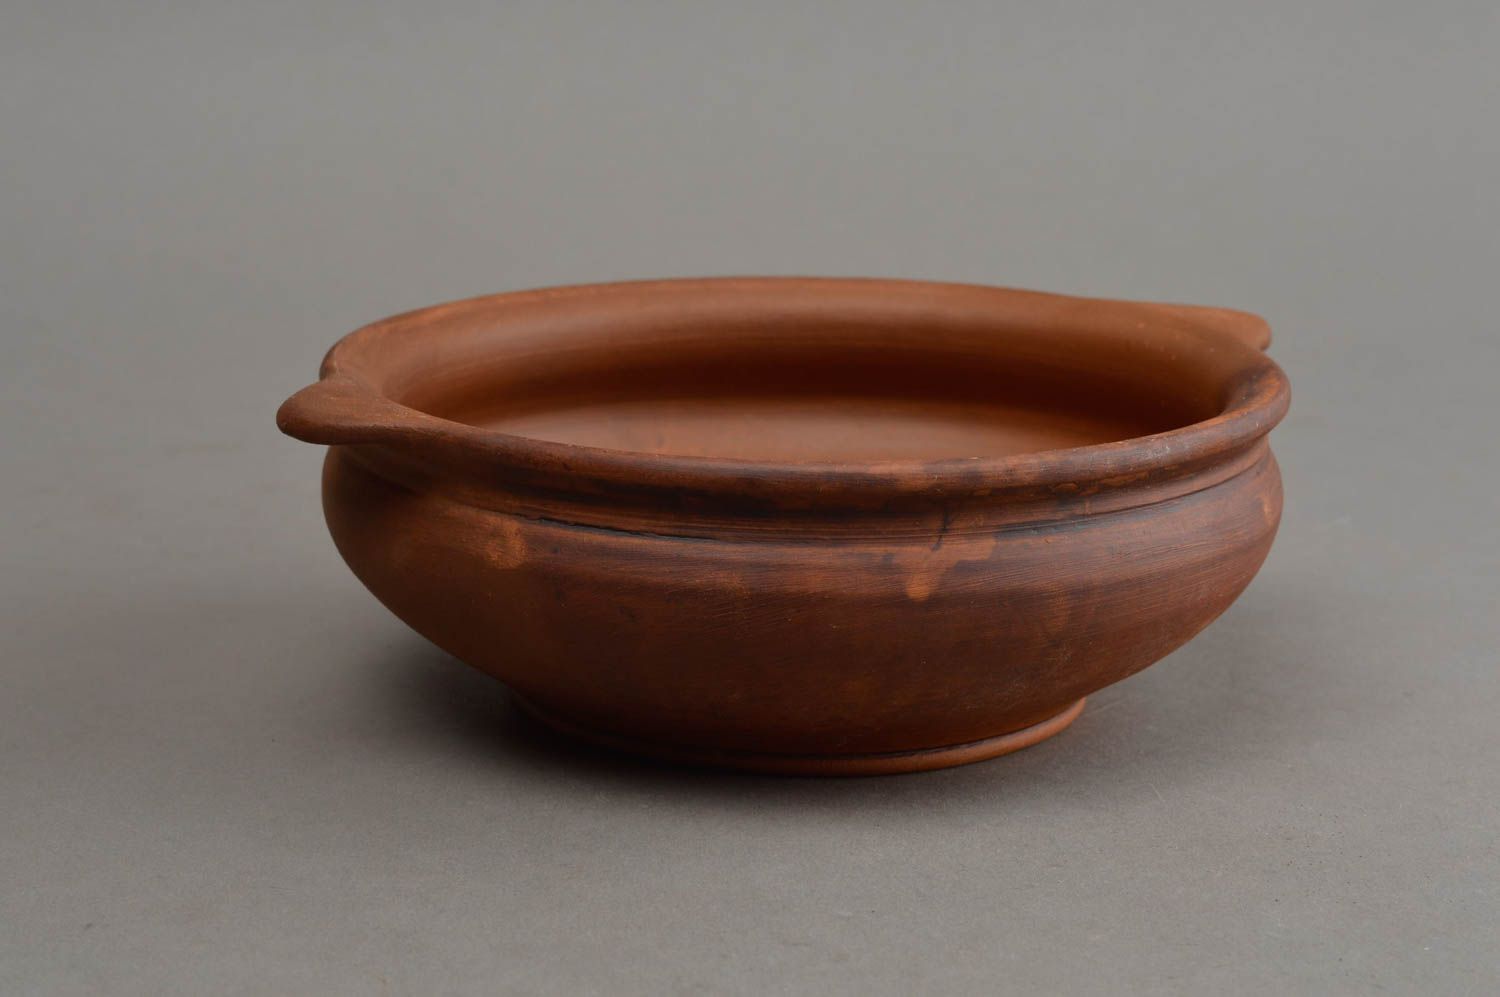 6 9 oz handmade terracotta cooking bowl with handles 0,84 lb photo 3